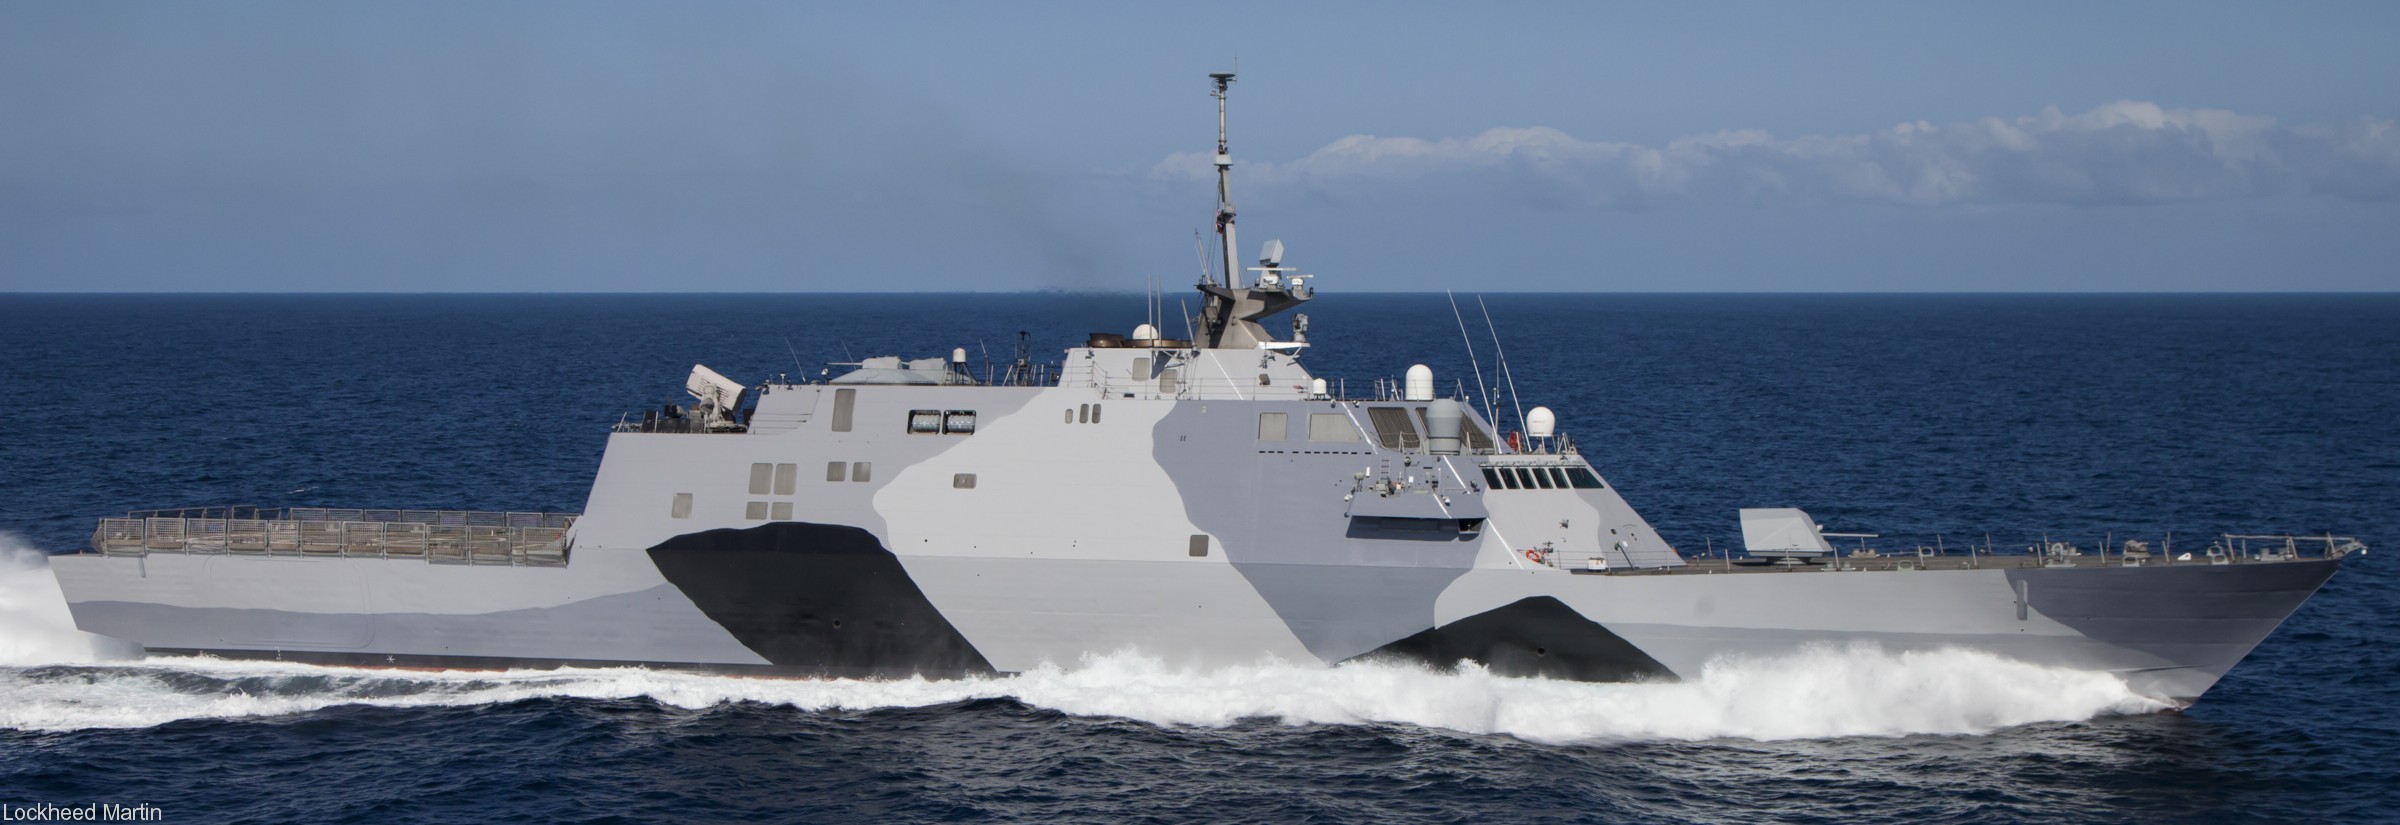 lcs-1 uss freedom class littoral combat ship us navy 190